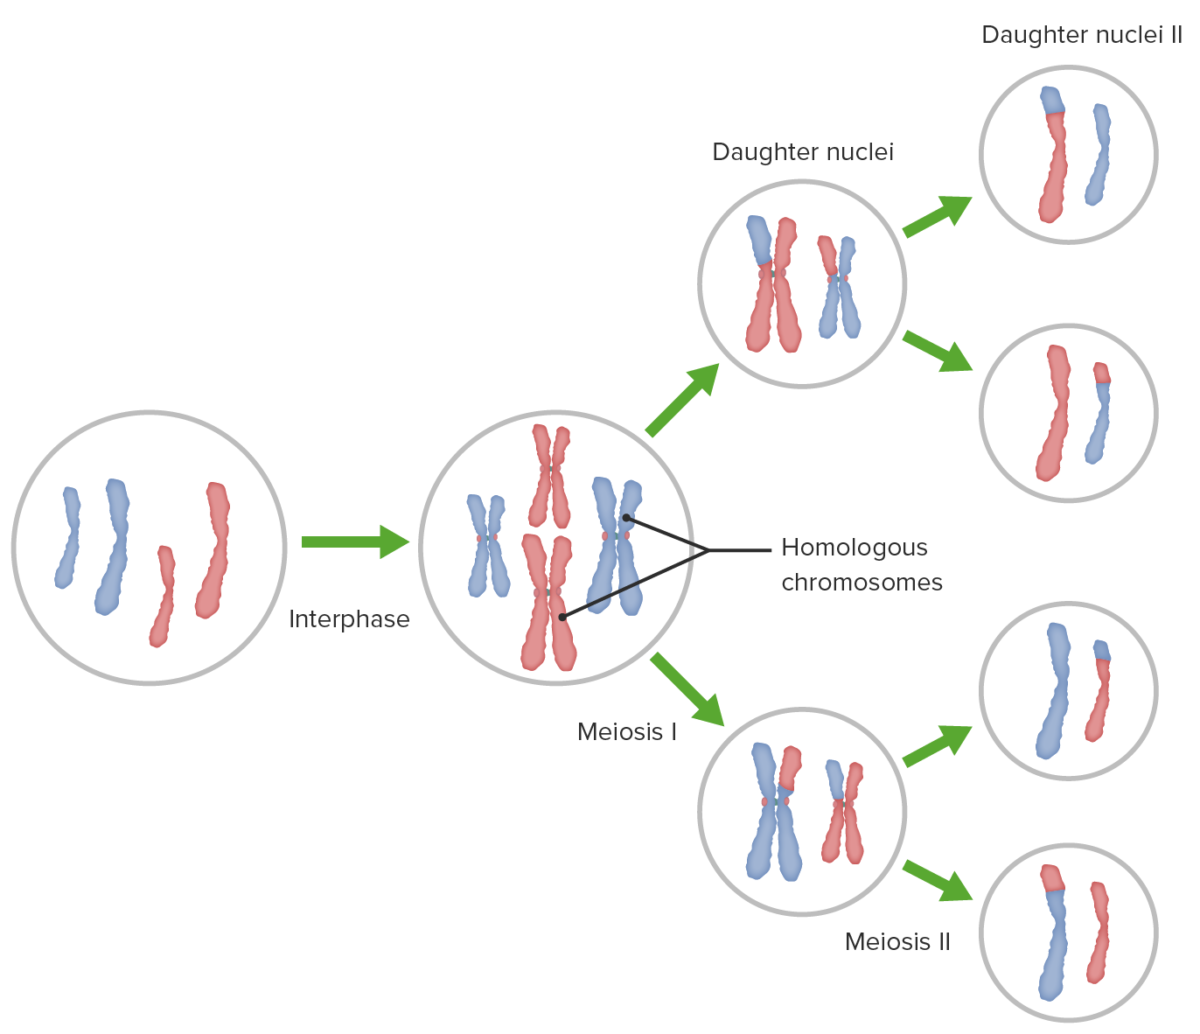 Overview of meiosis i and ii